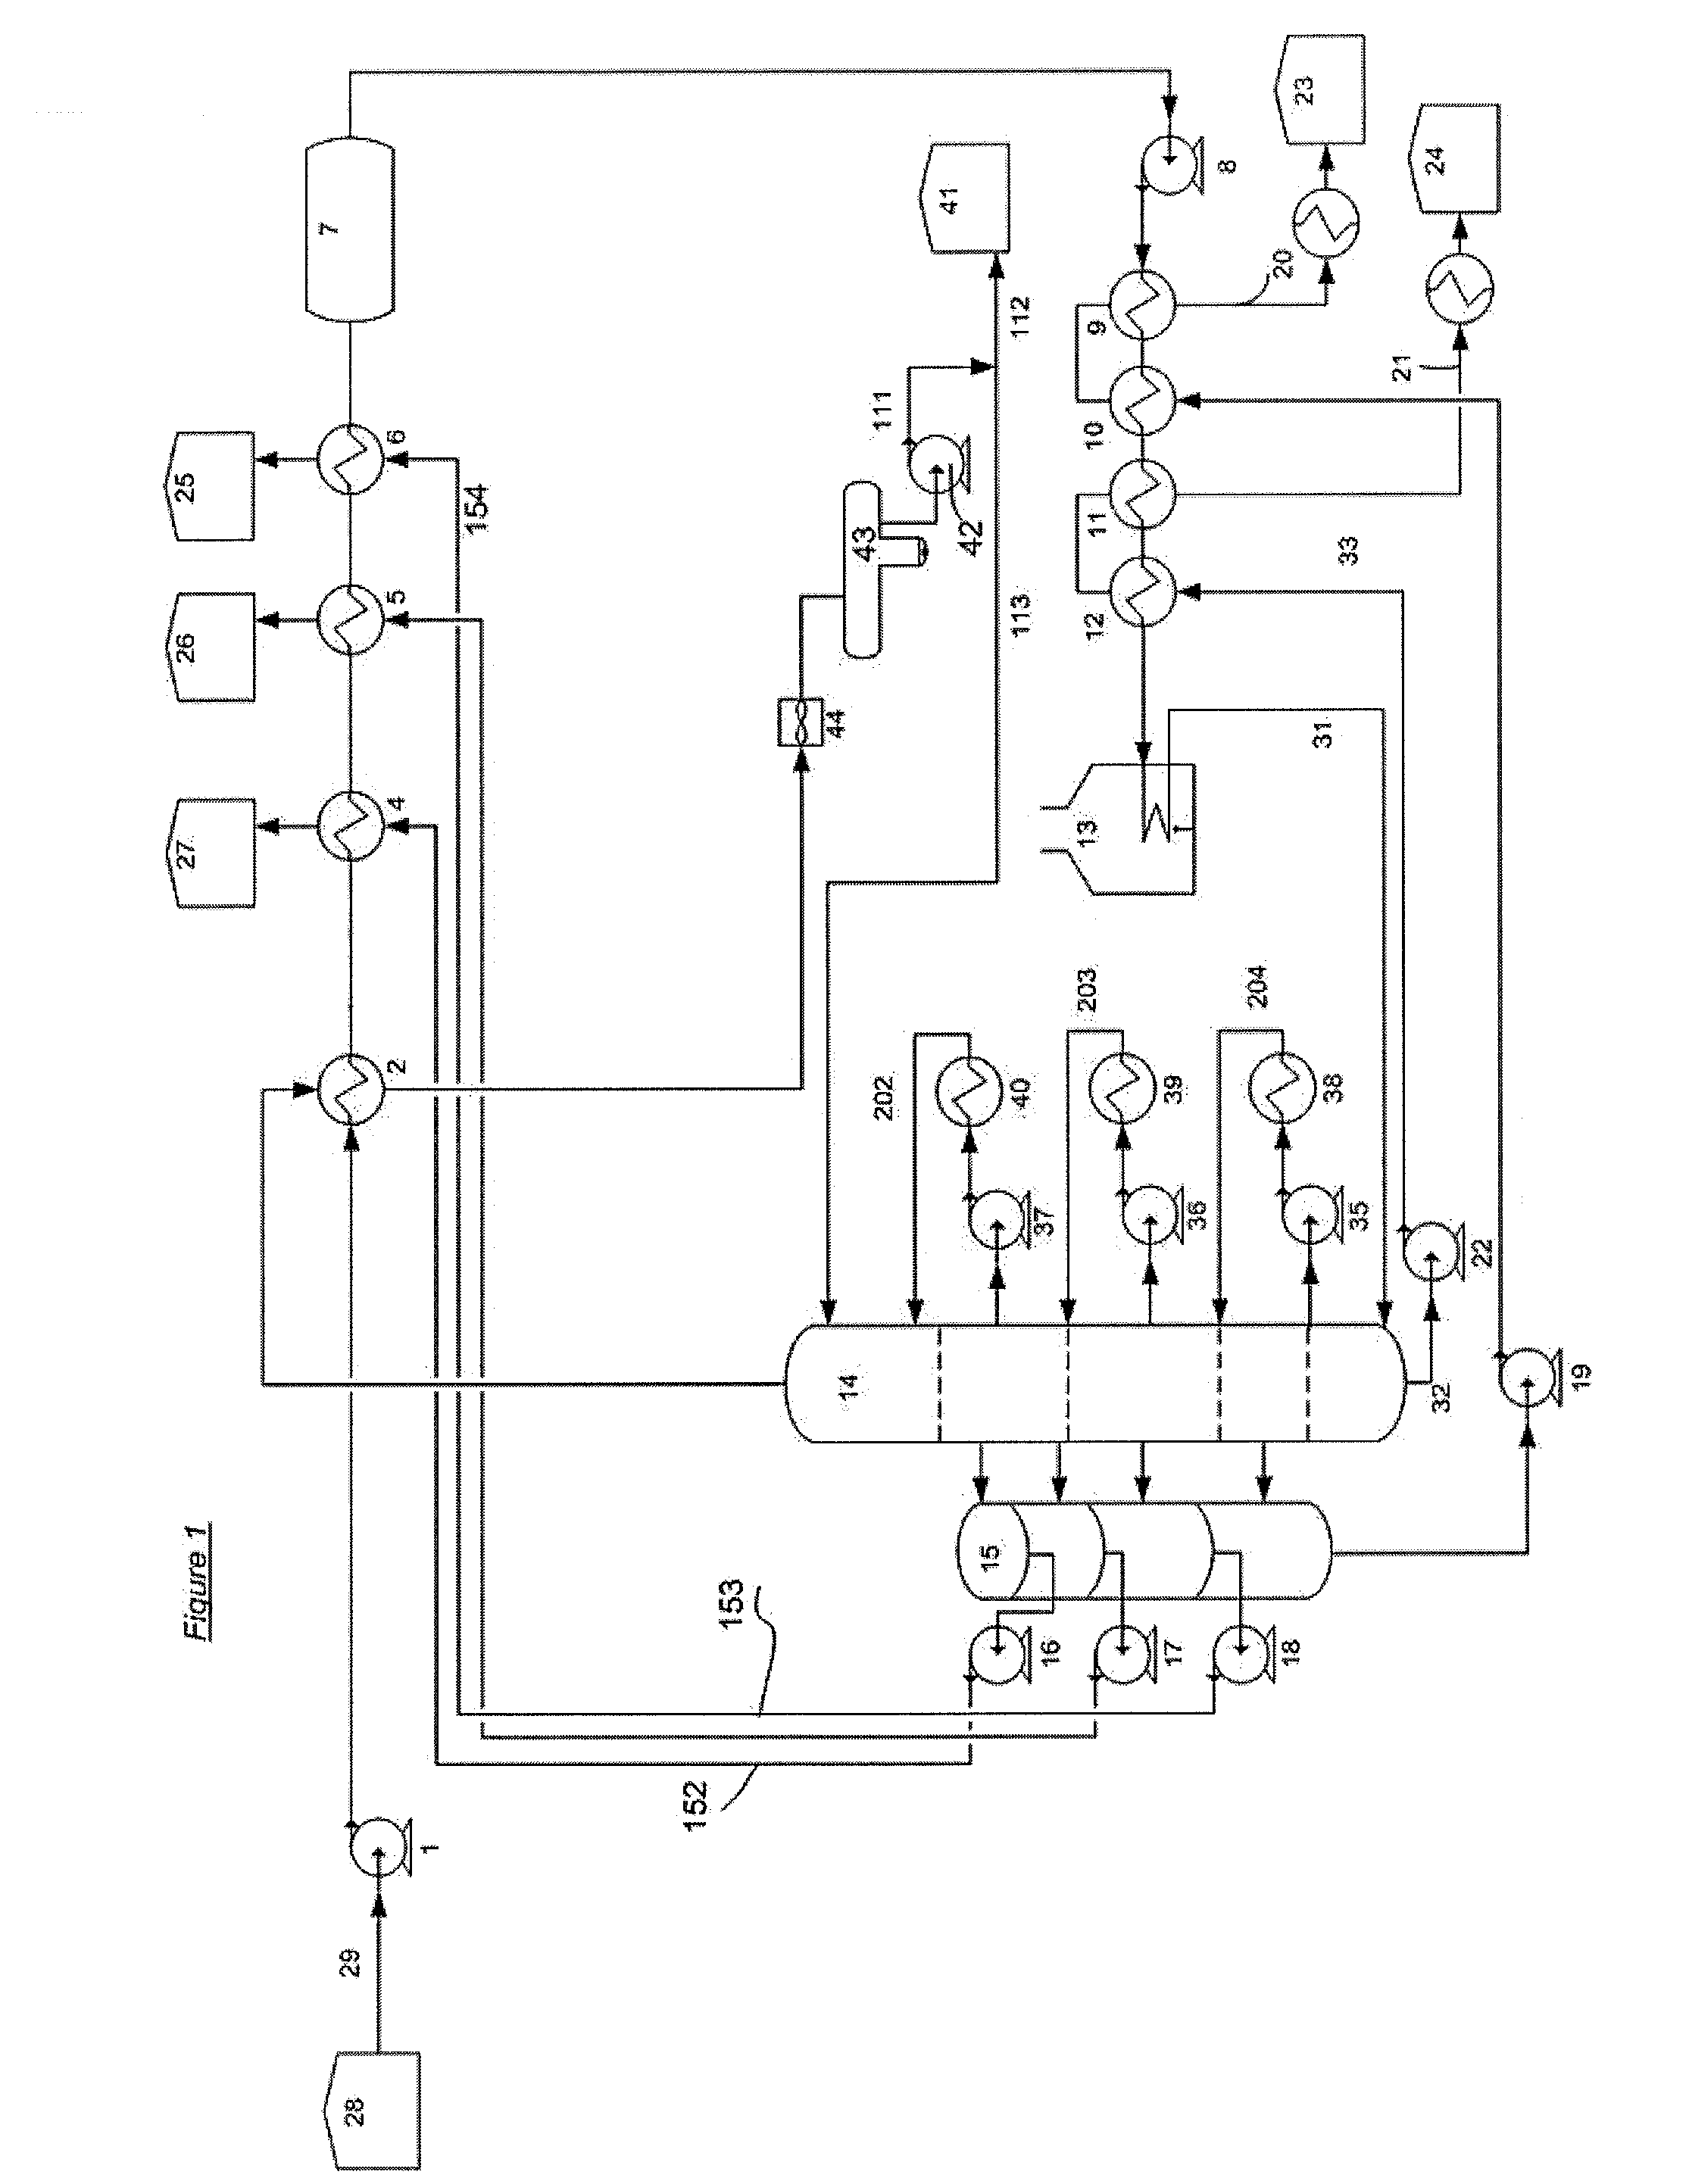 Method, apparatus and chemical products for treating petroleum equipment